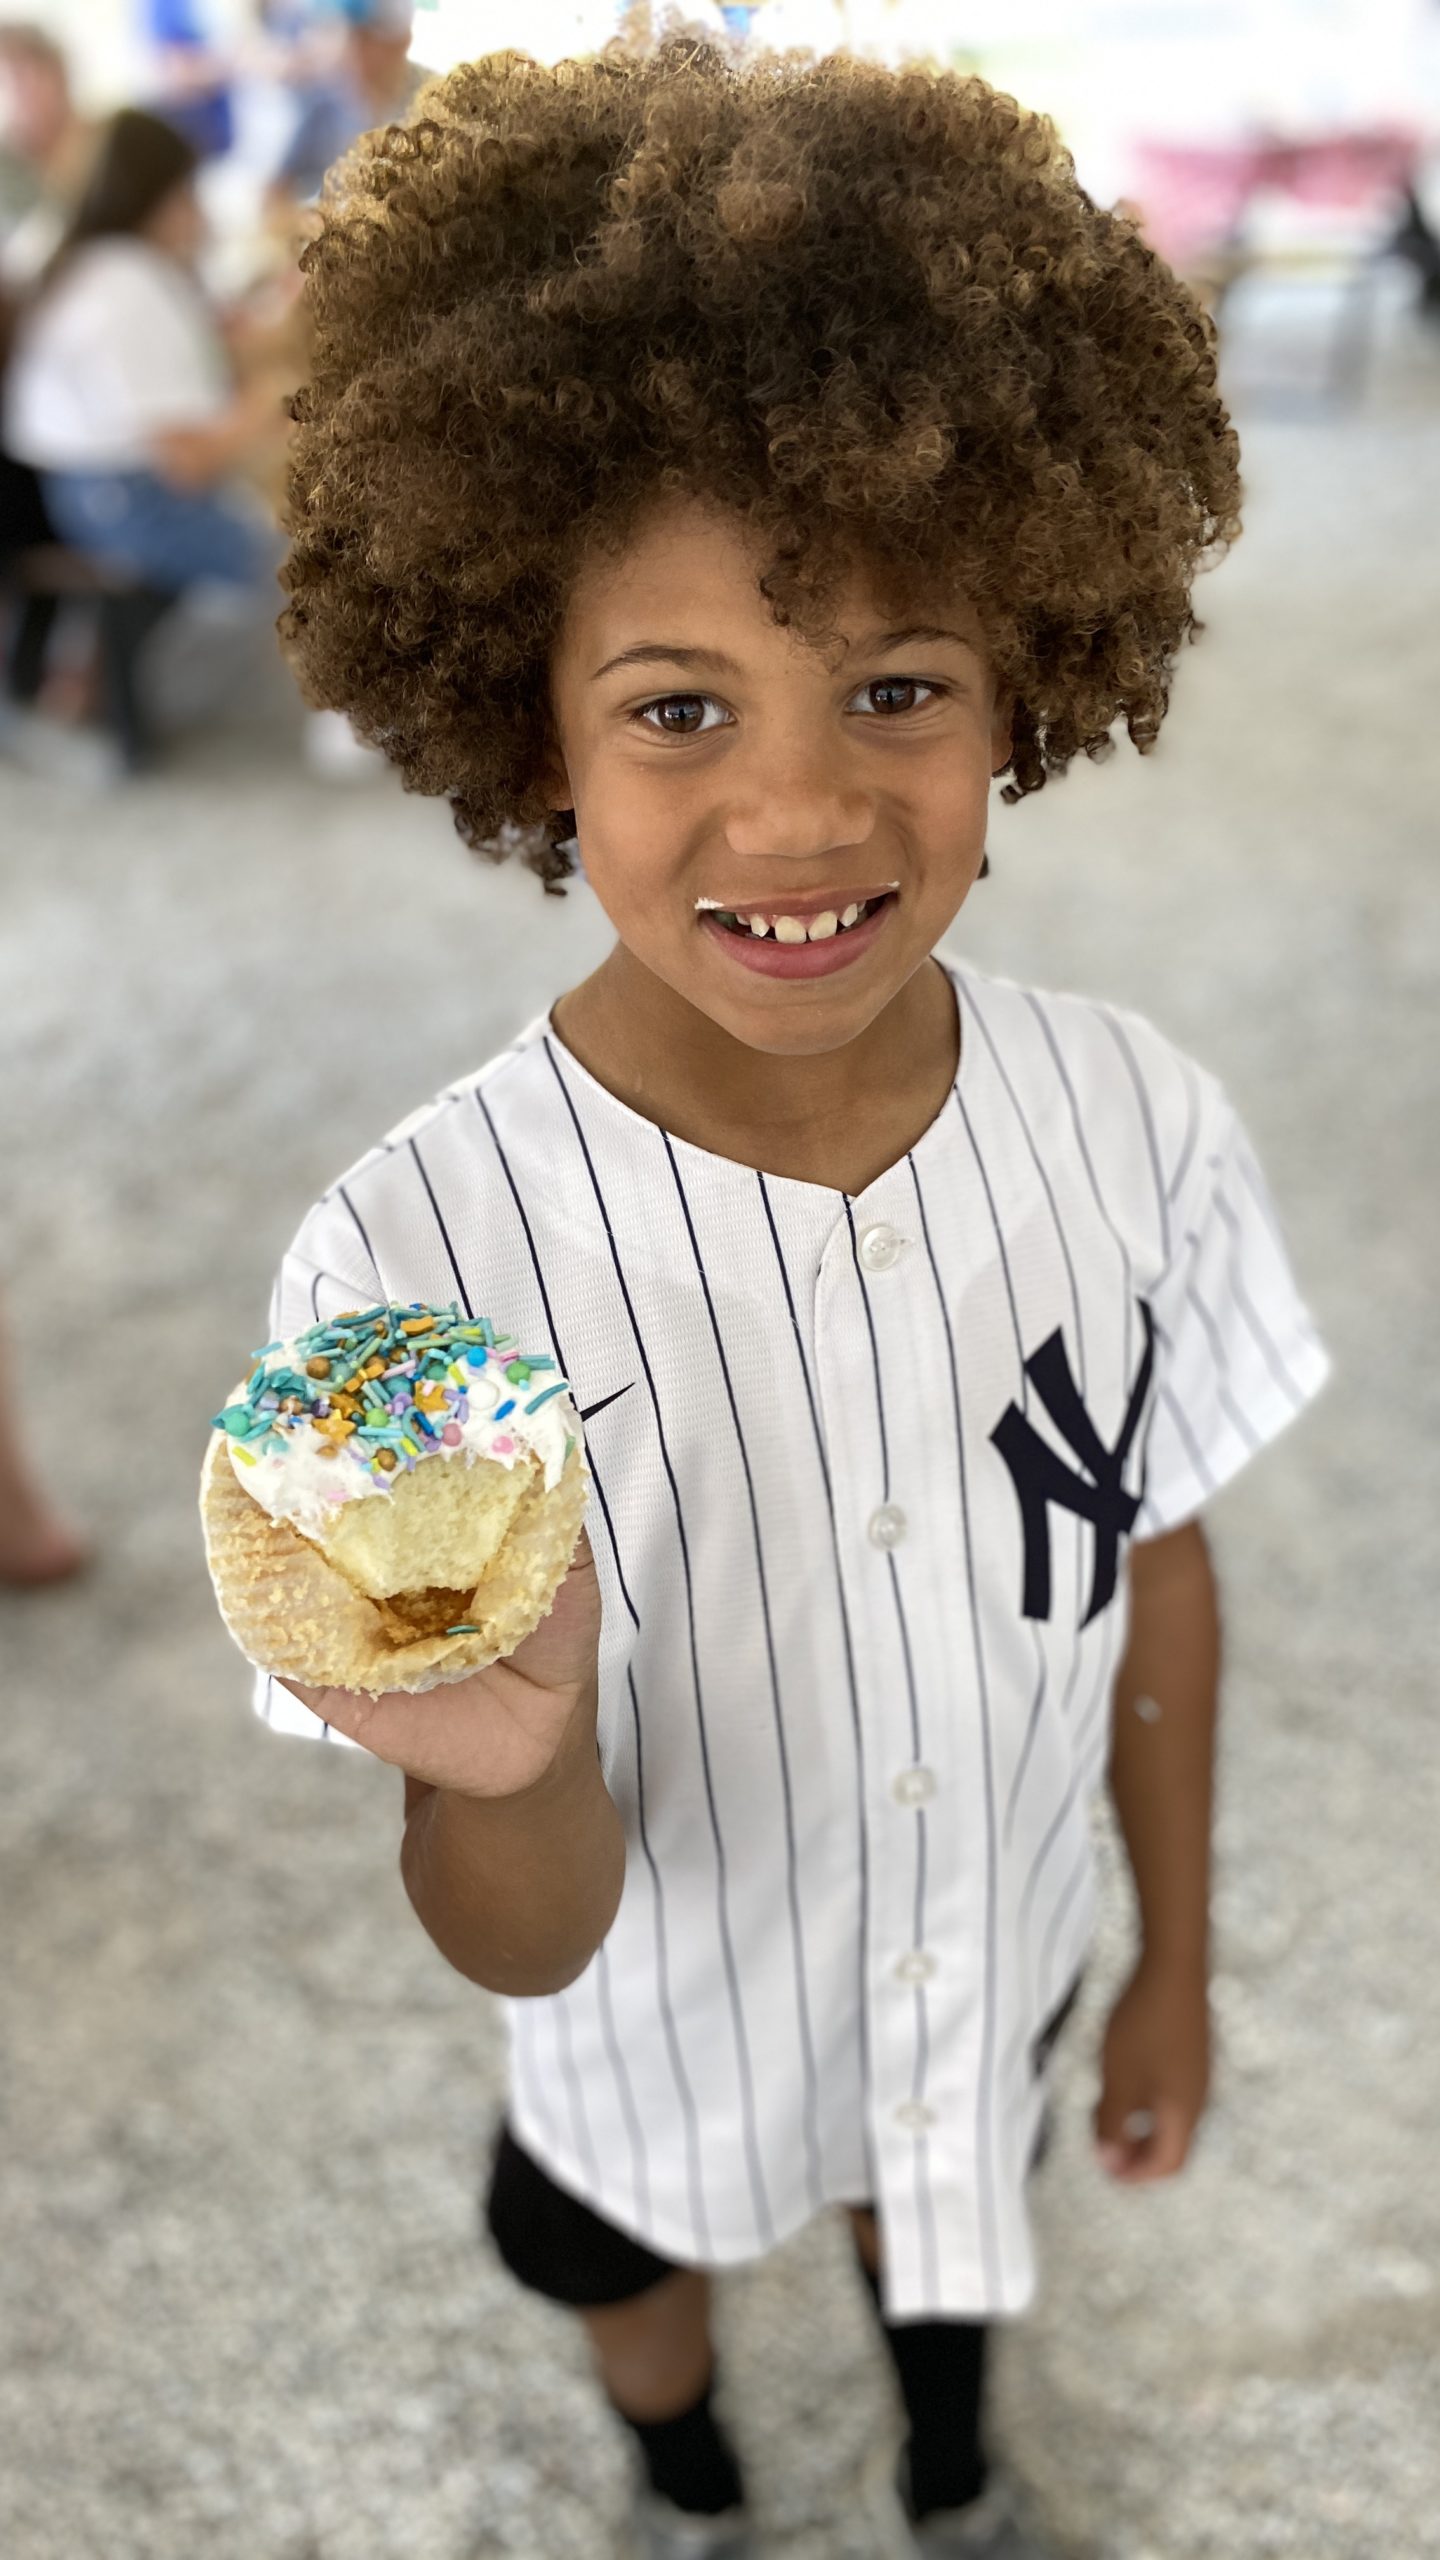 A child is holding up a cupcake he decorated with sprinkles